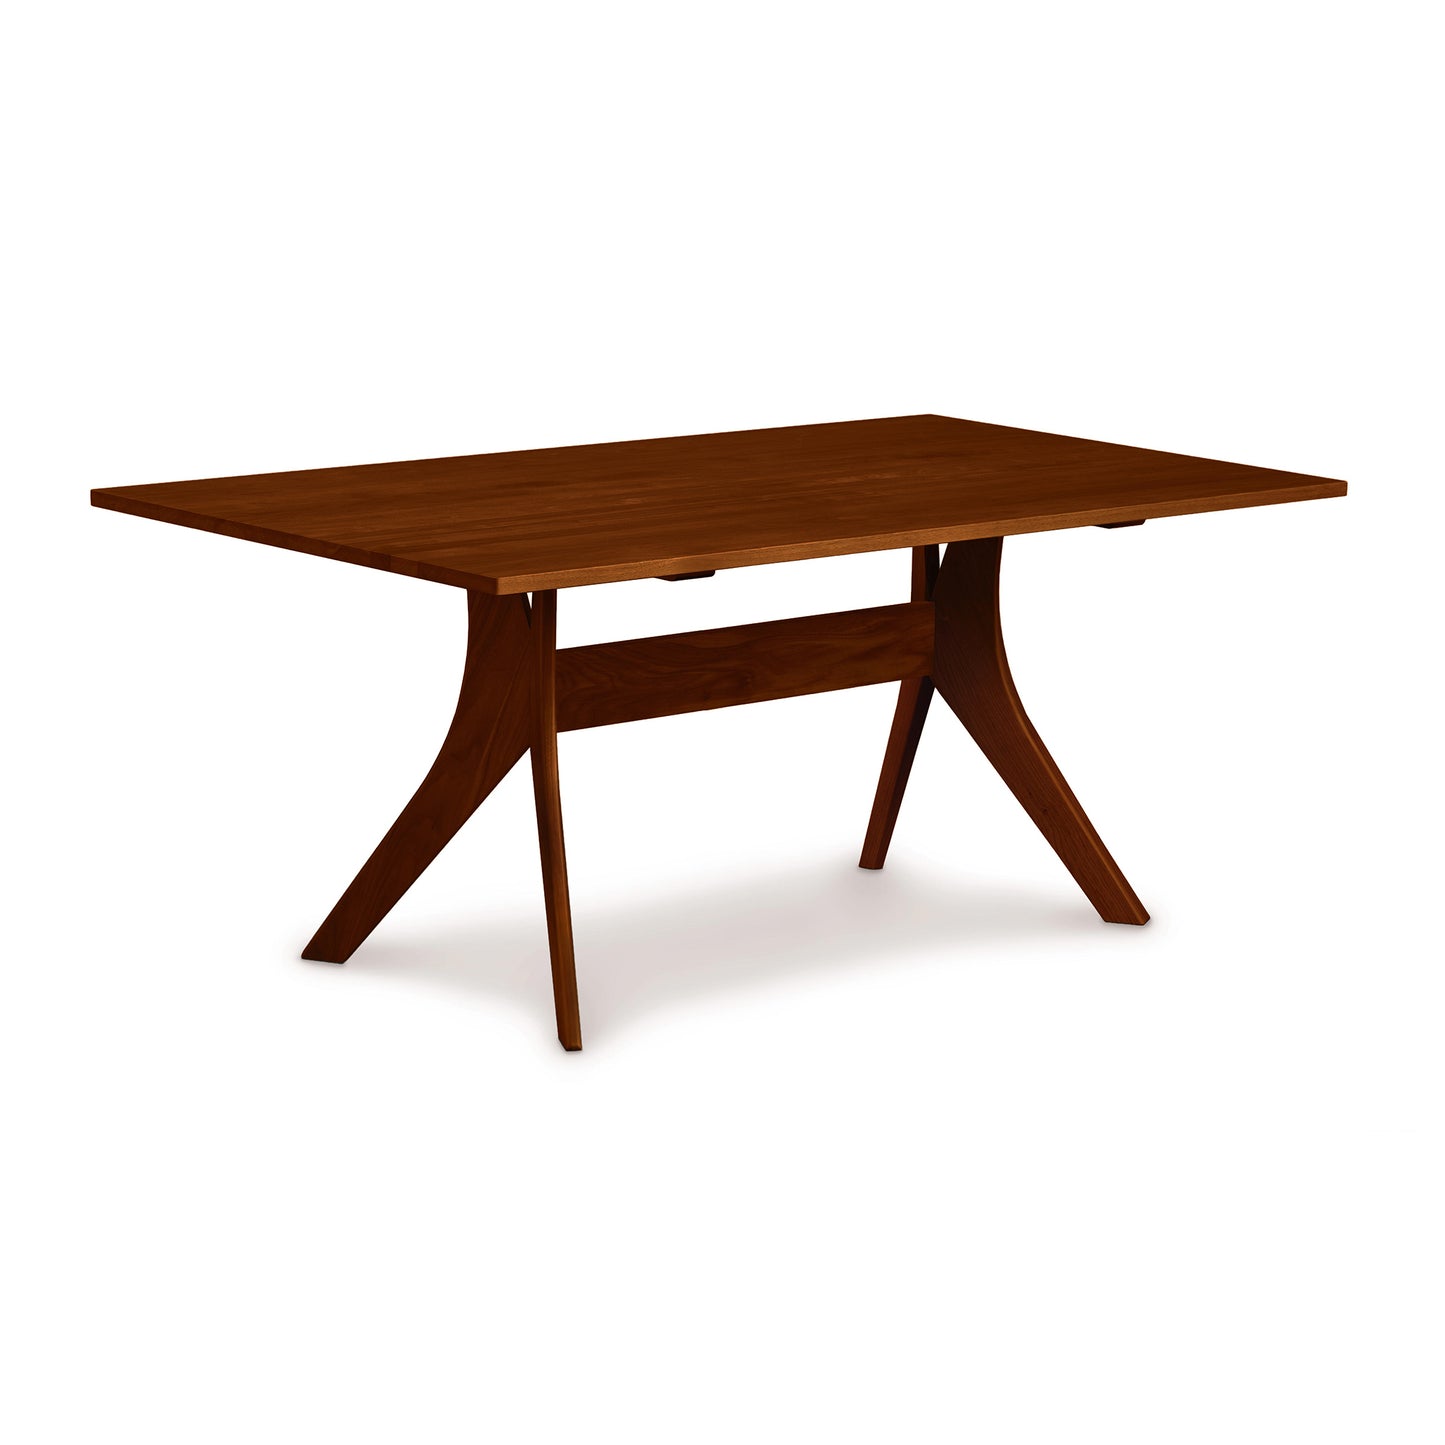 An Audrey Solid Top Dining Table crafted from solid hardwood, featuring a wooden top and legs, made by Copeland Furniture.